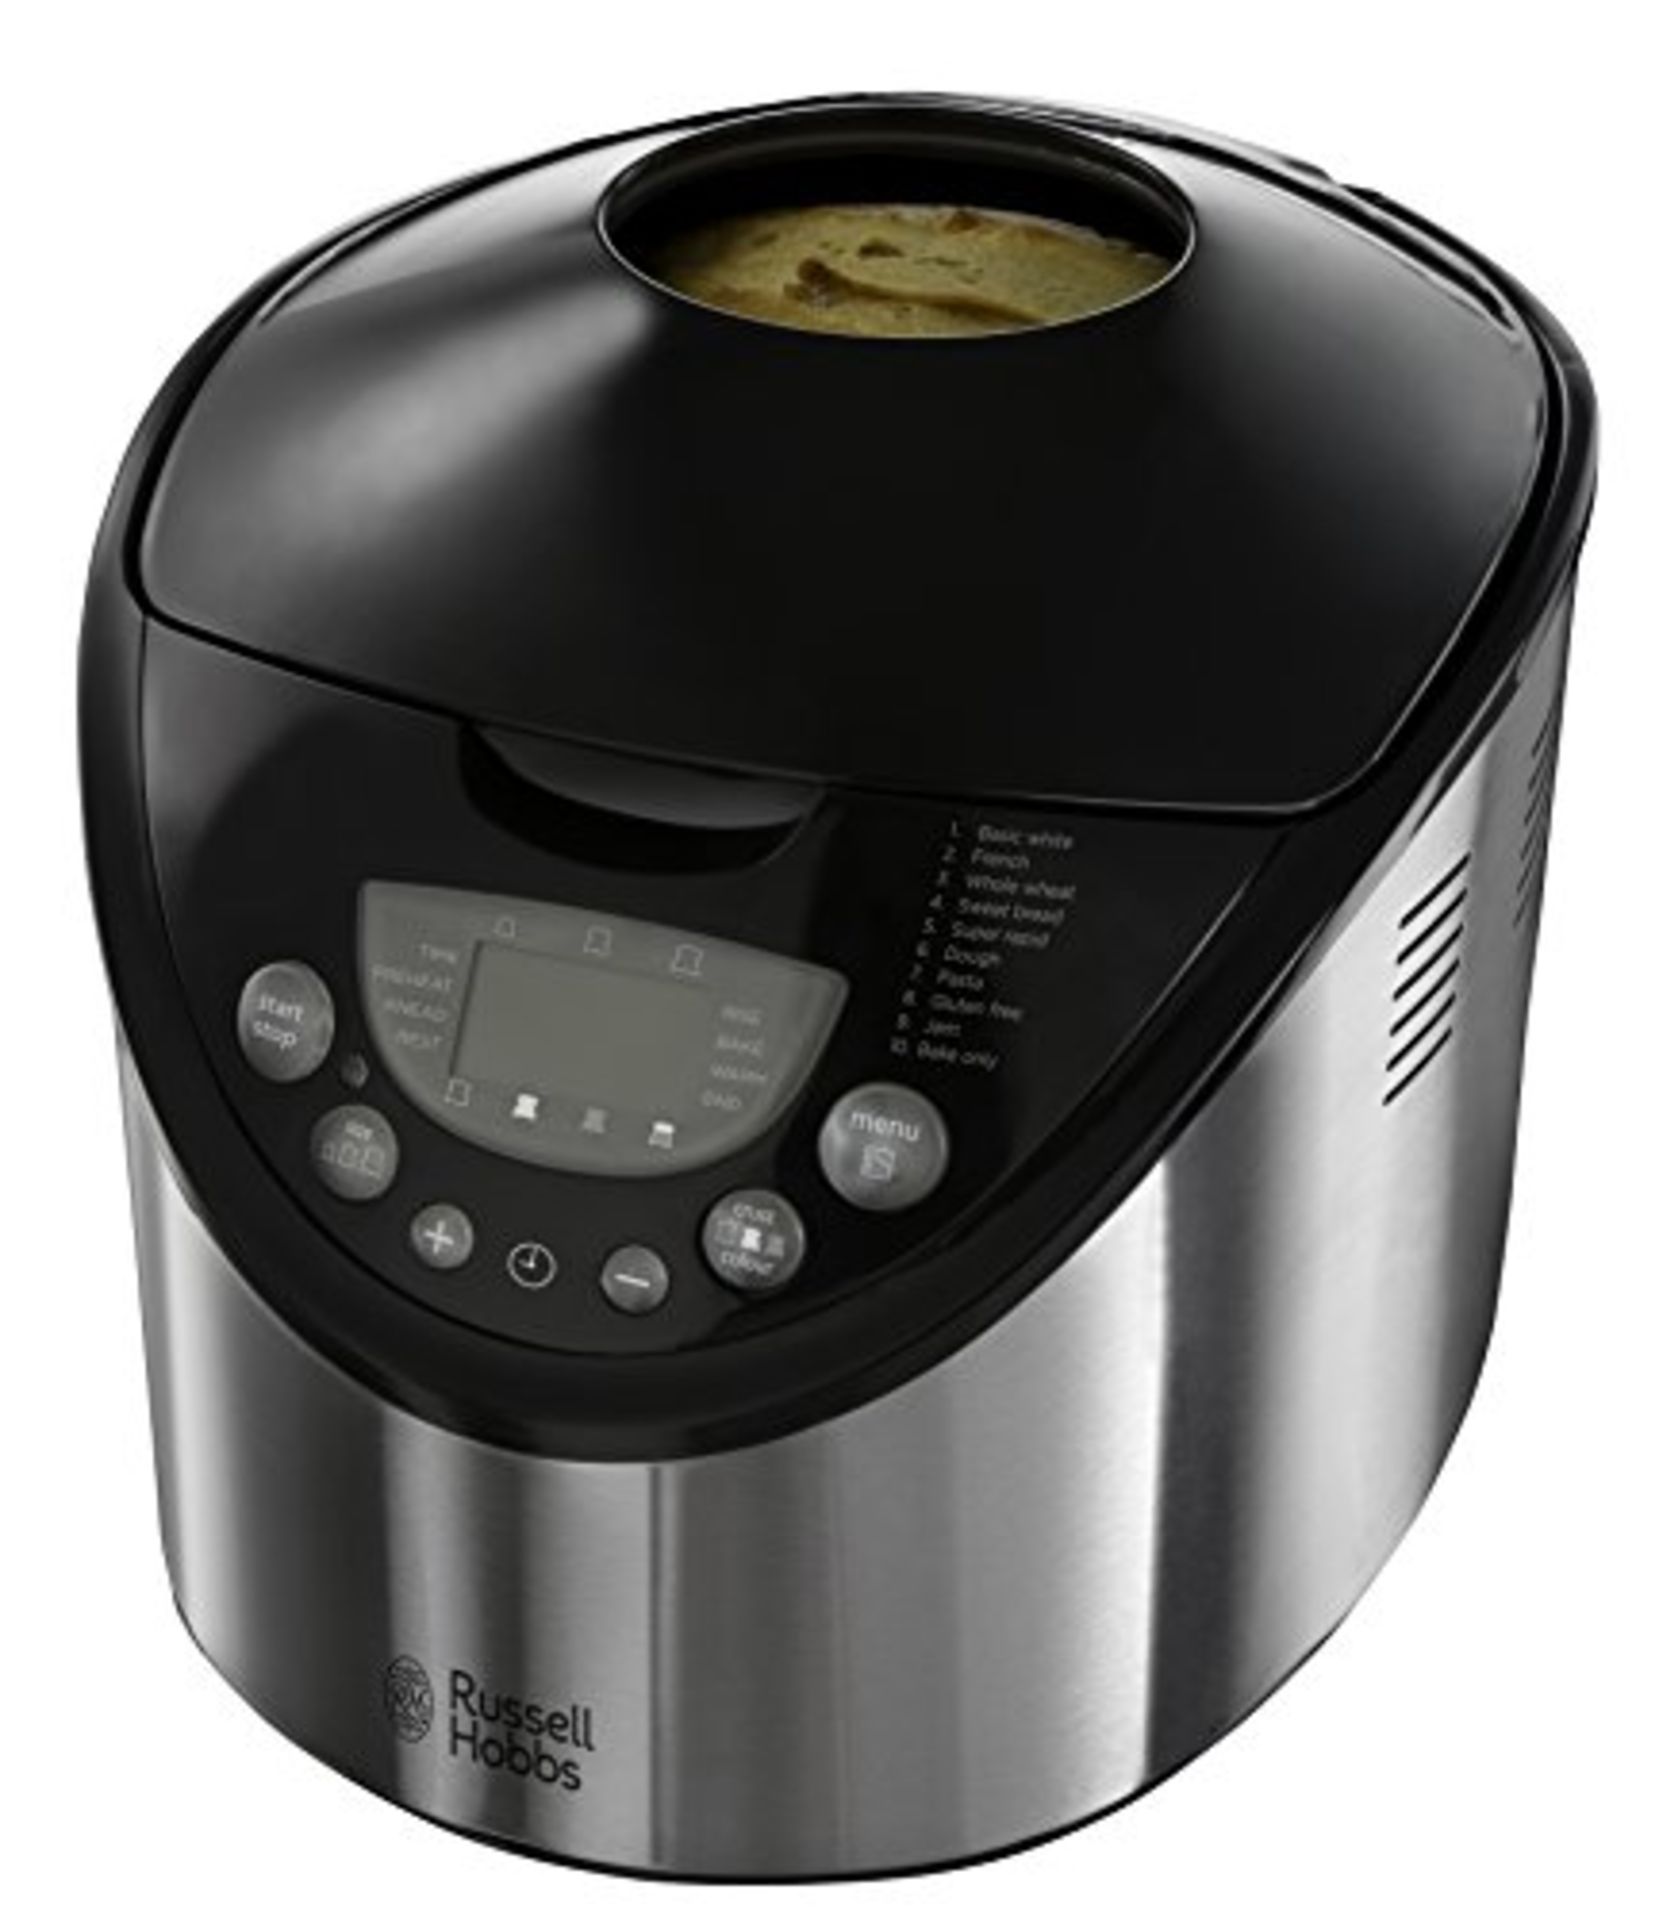 V Brand New Russell Hobbs 3 Loaf Size Settings Stainless Steel Bread Maker ISP £69.99 (Very)